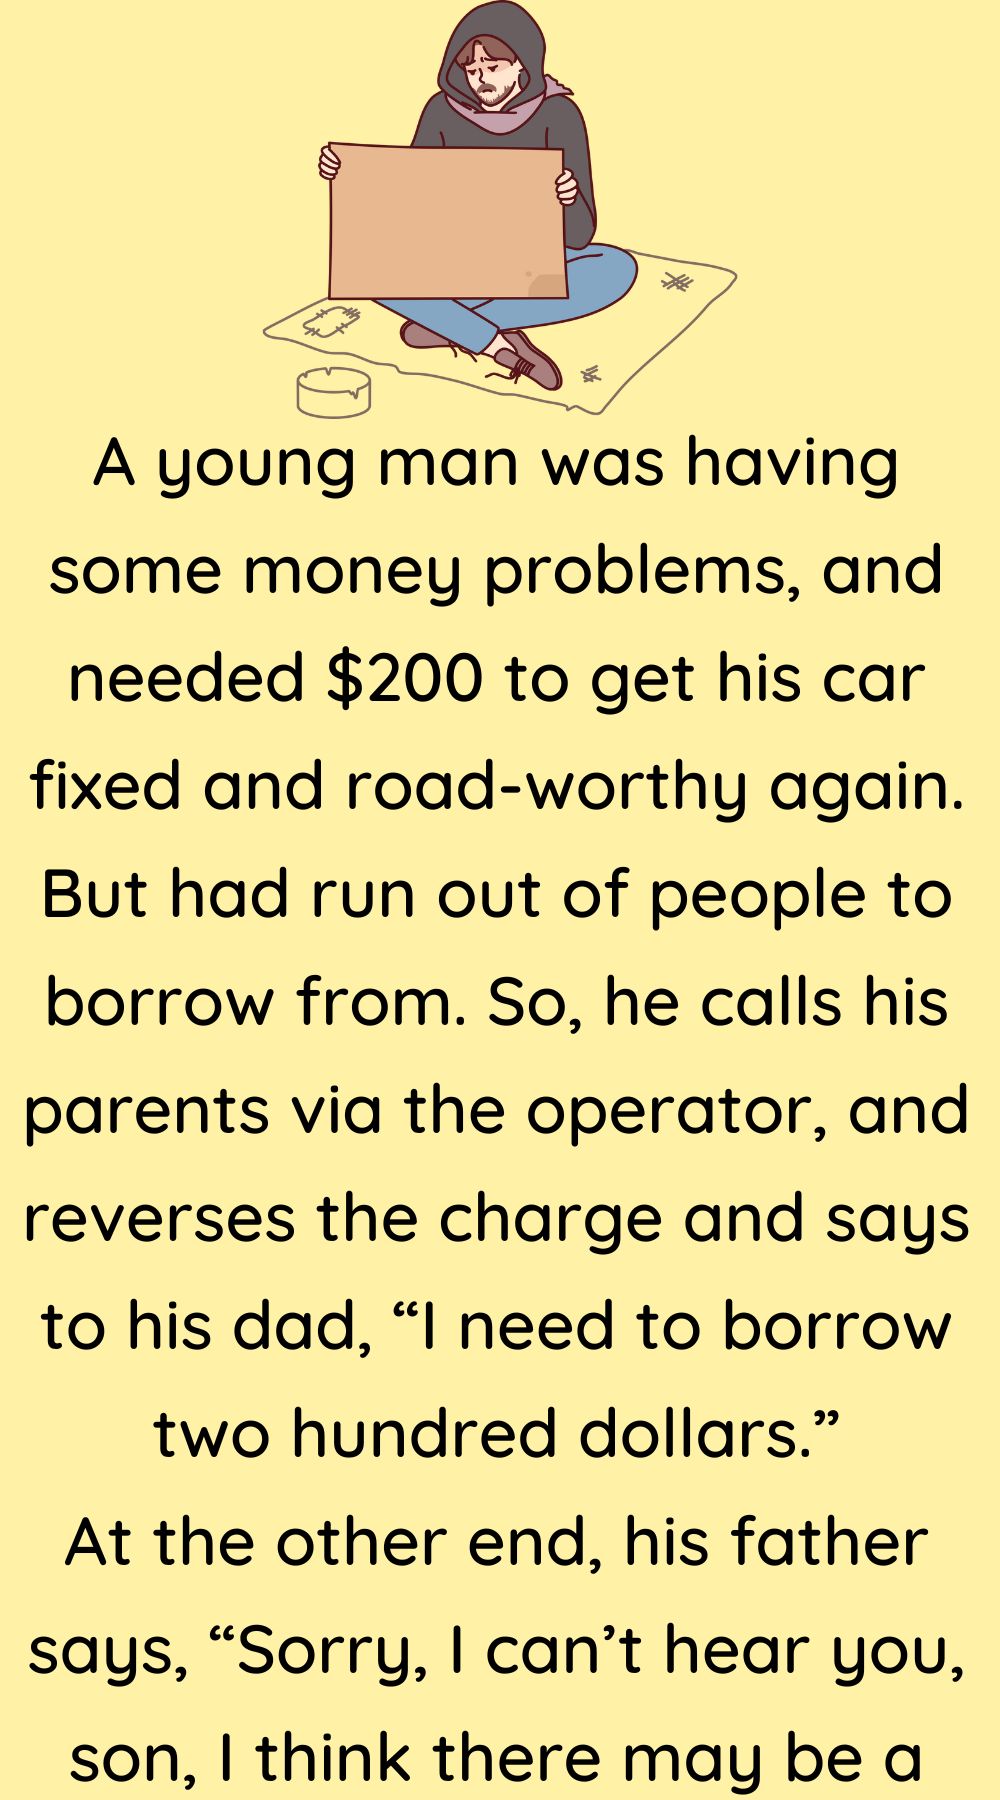 A young man was having some money problems